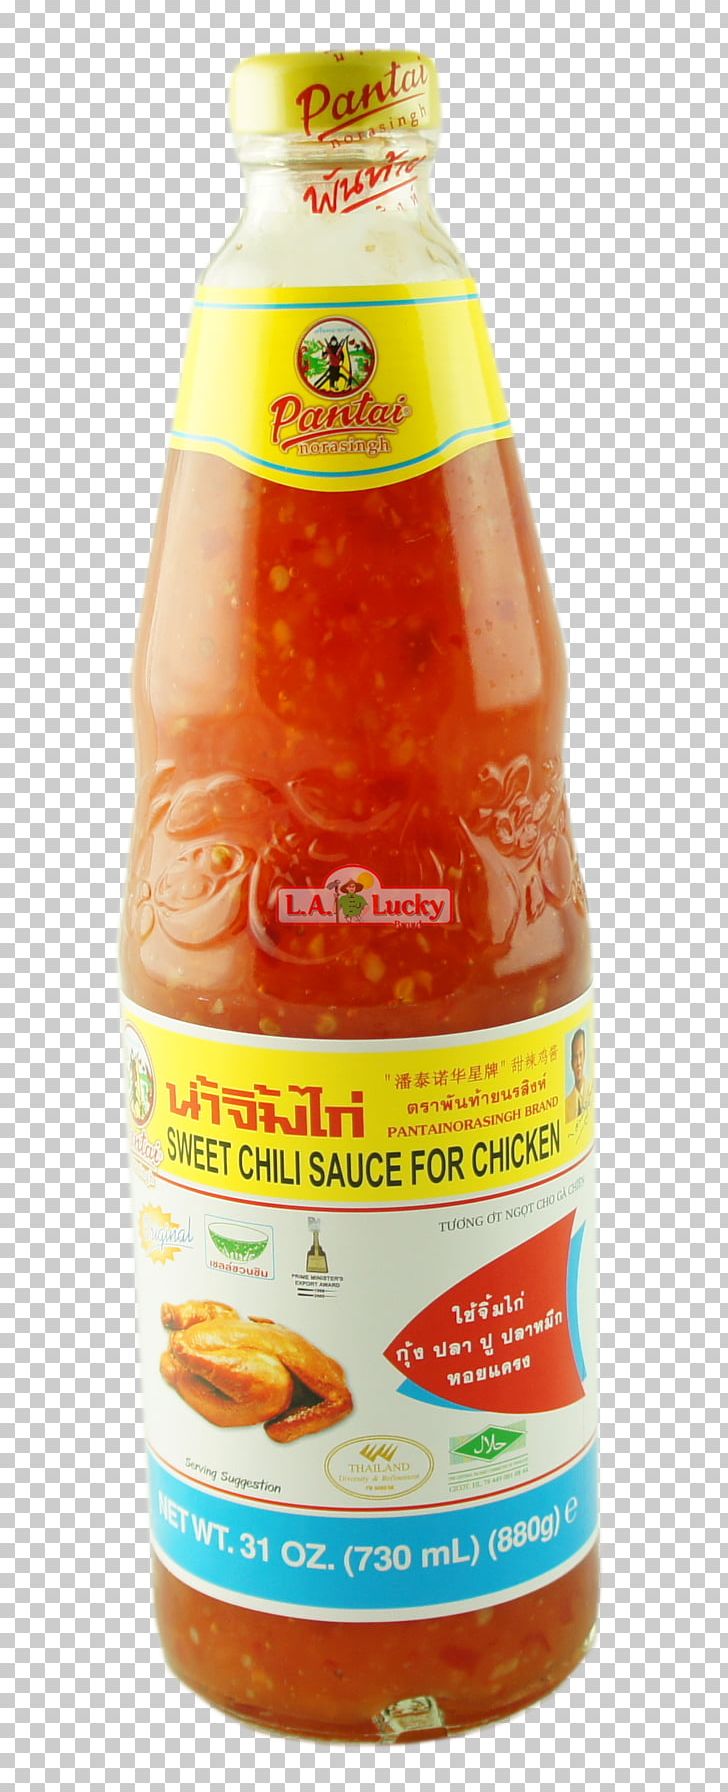 Sweet Chili Sauce Orange Drink Hot Sauce Product PNG, Clipart, Chili Sauce, Condiment, Food, Fruit Preserve, Hot Sauce Free PNG Download